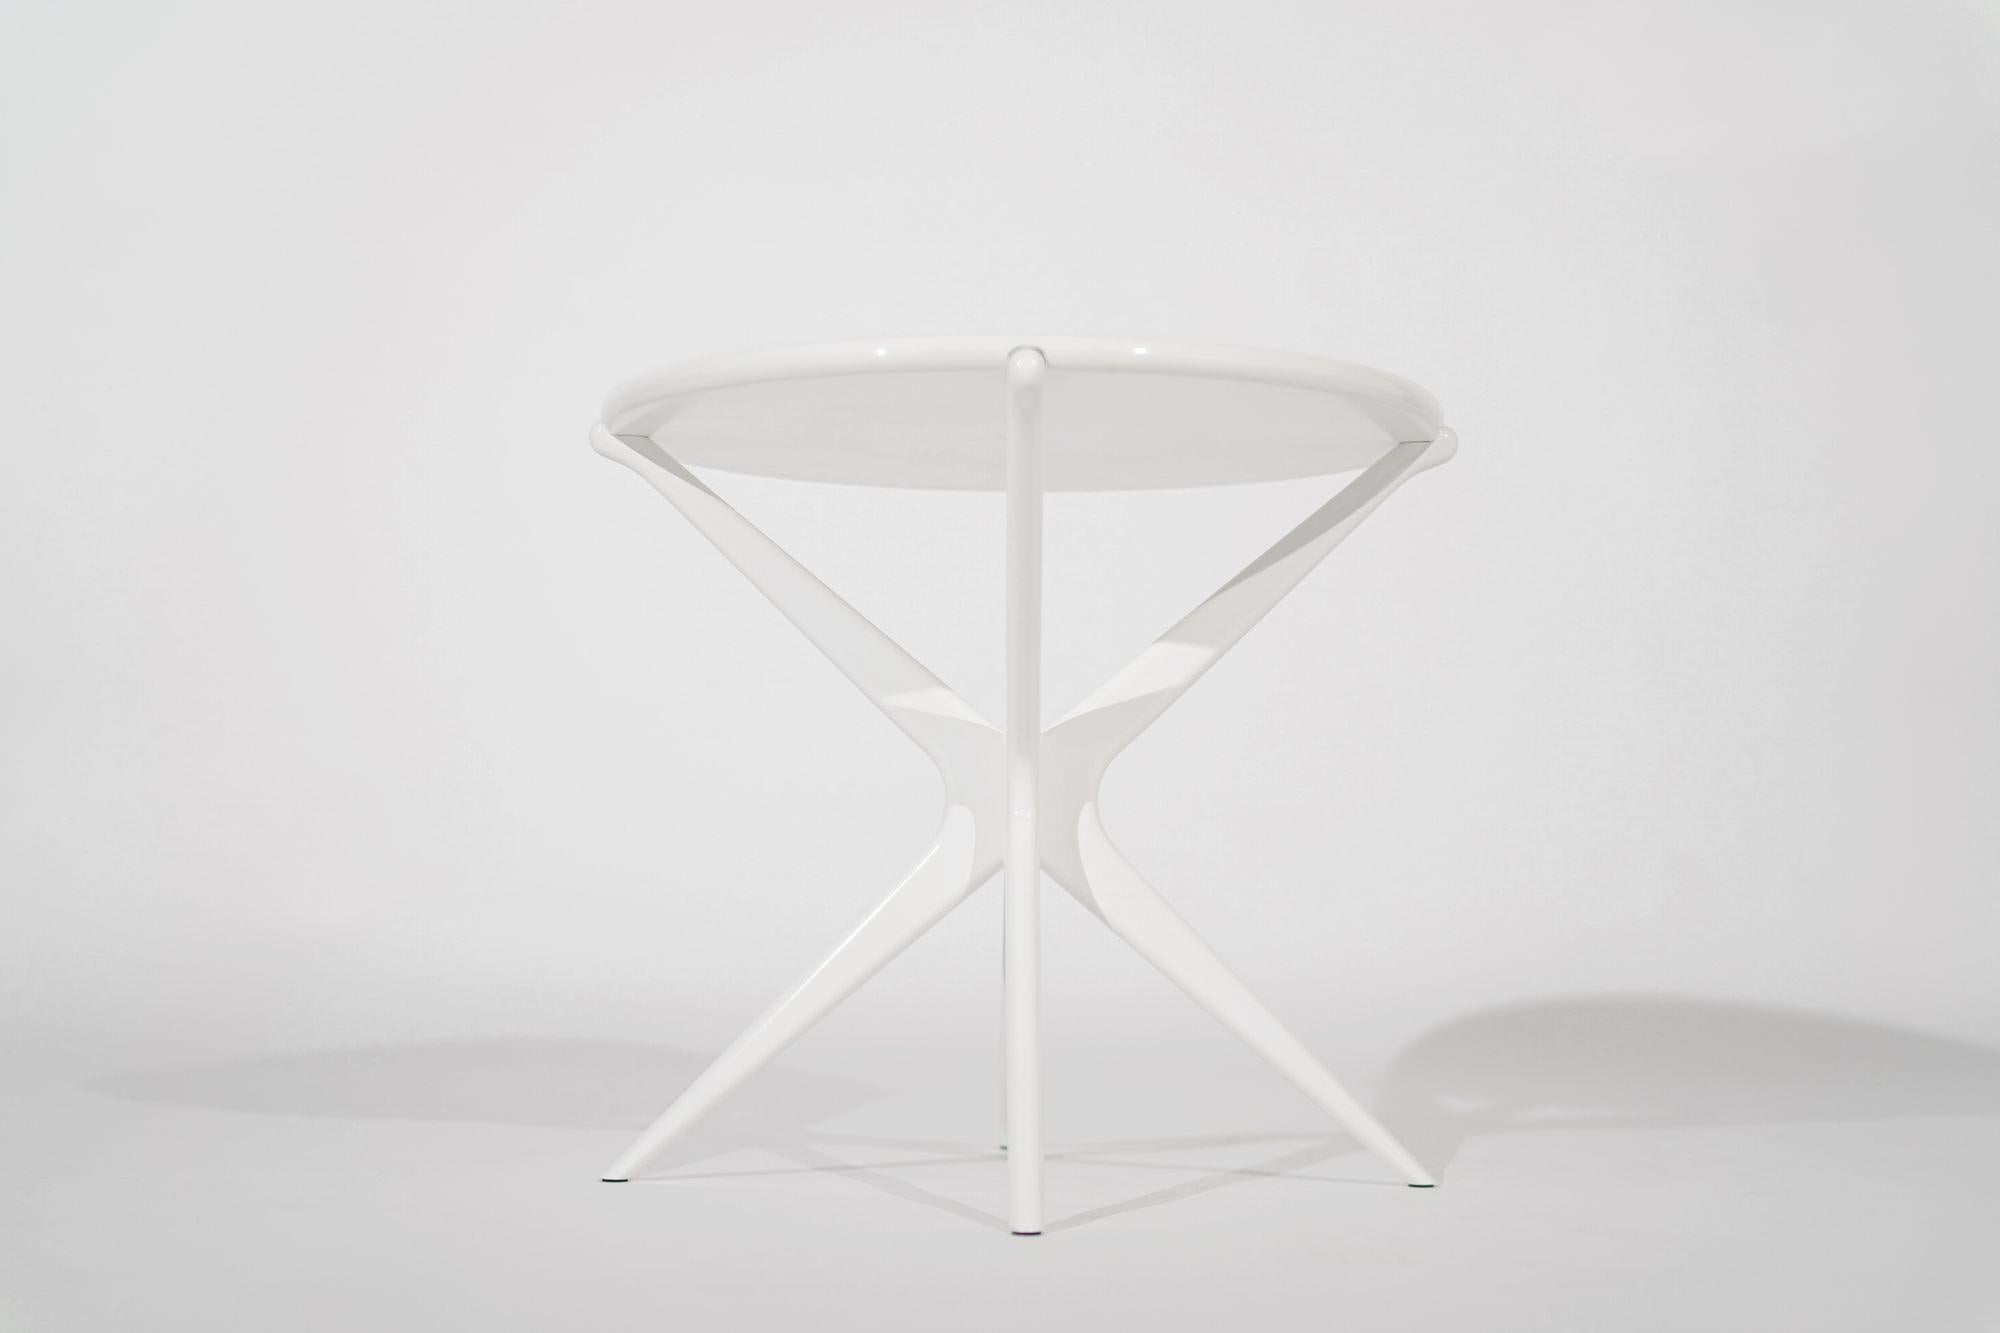 Contemporary Gazelle V2 End Tables in White Lacquer by Stamford Modern